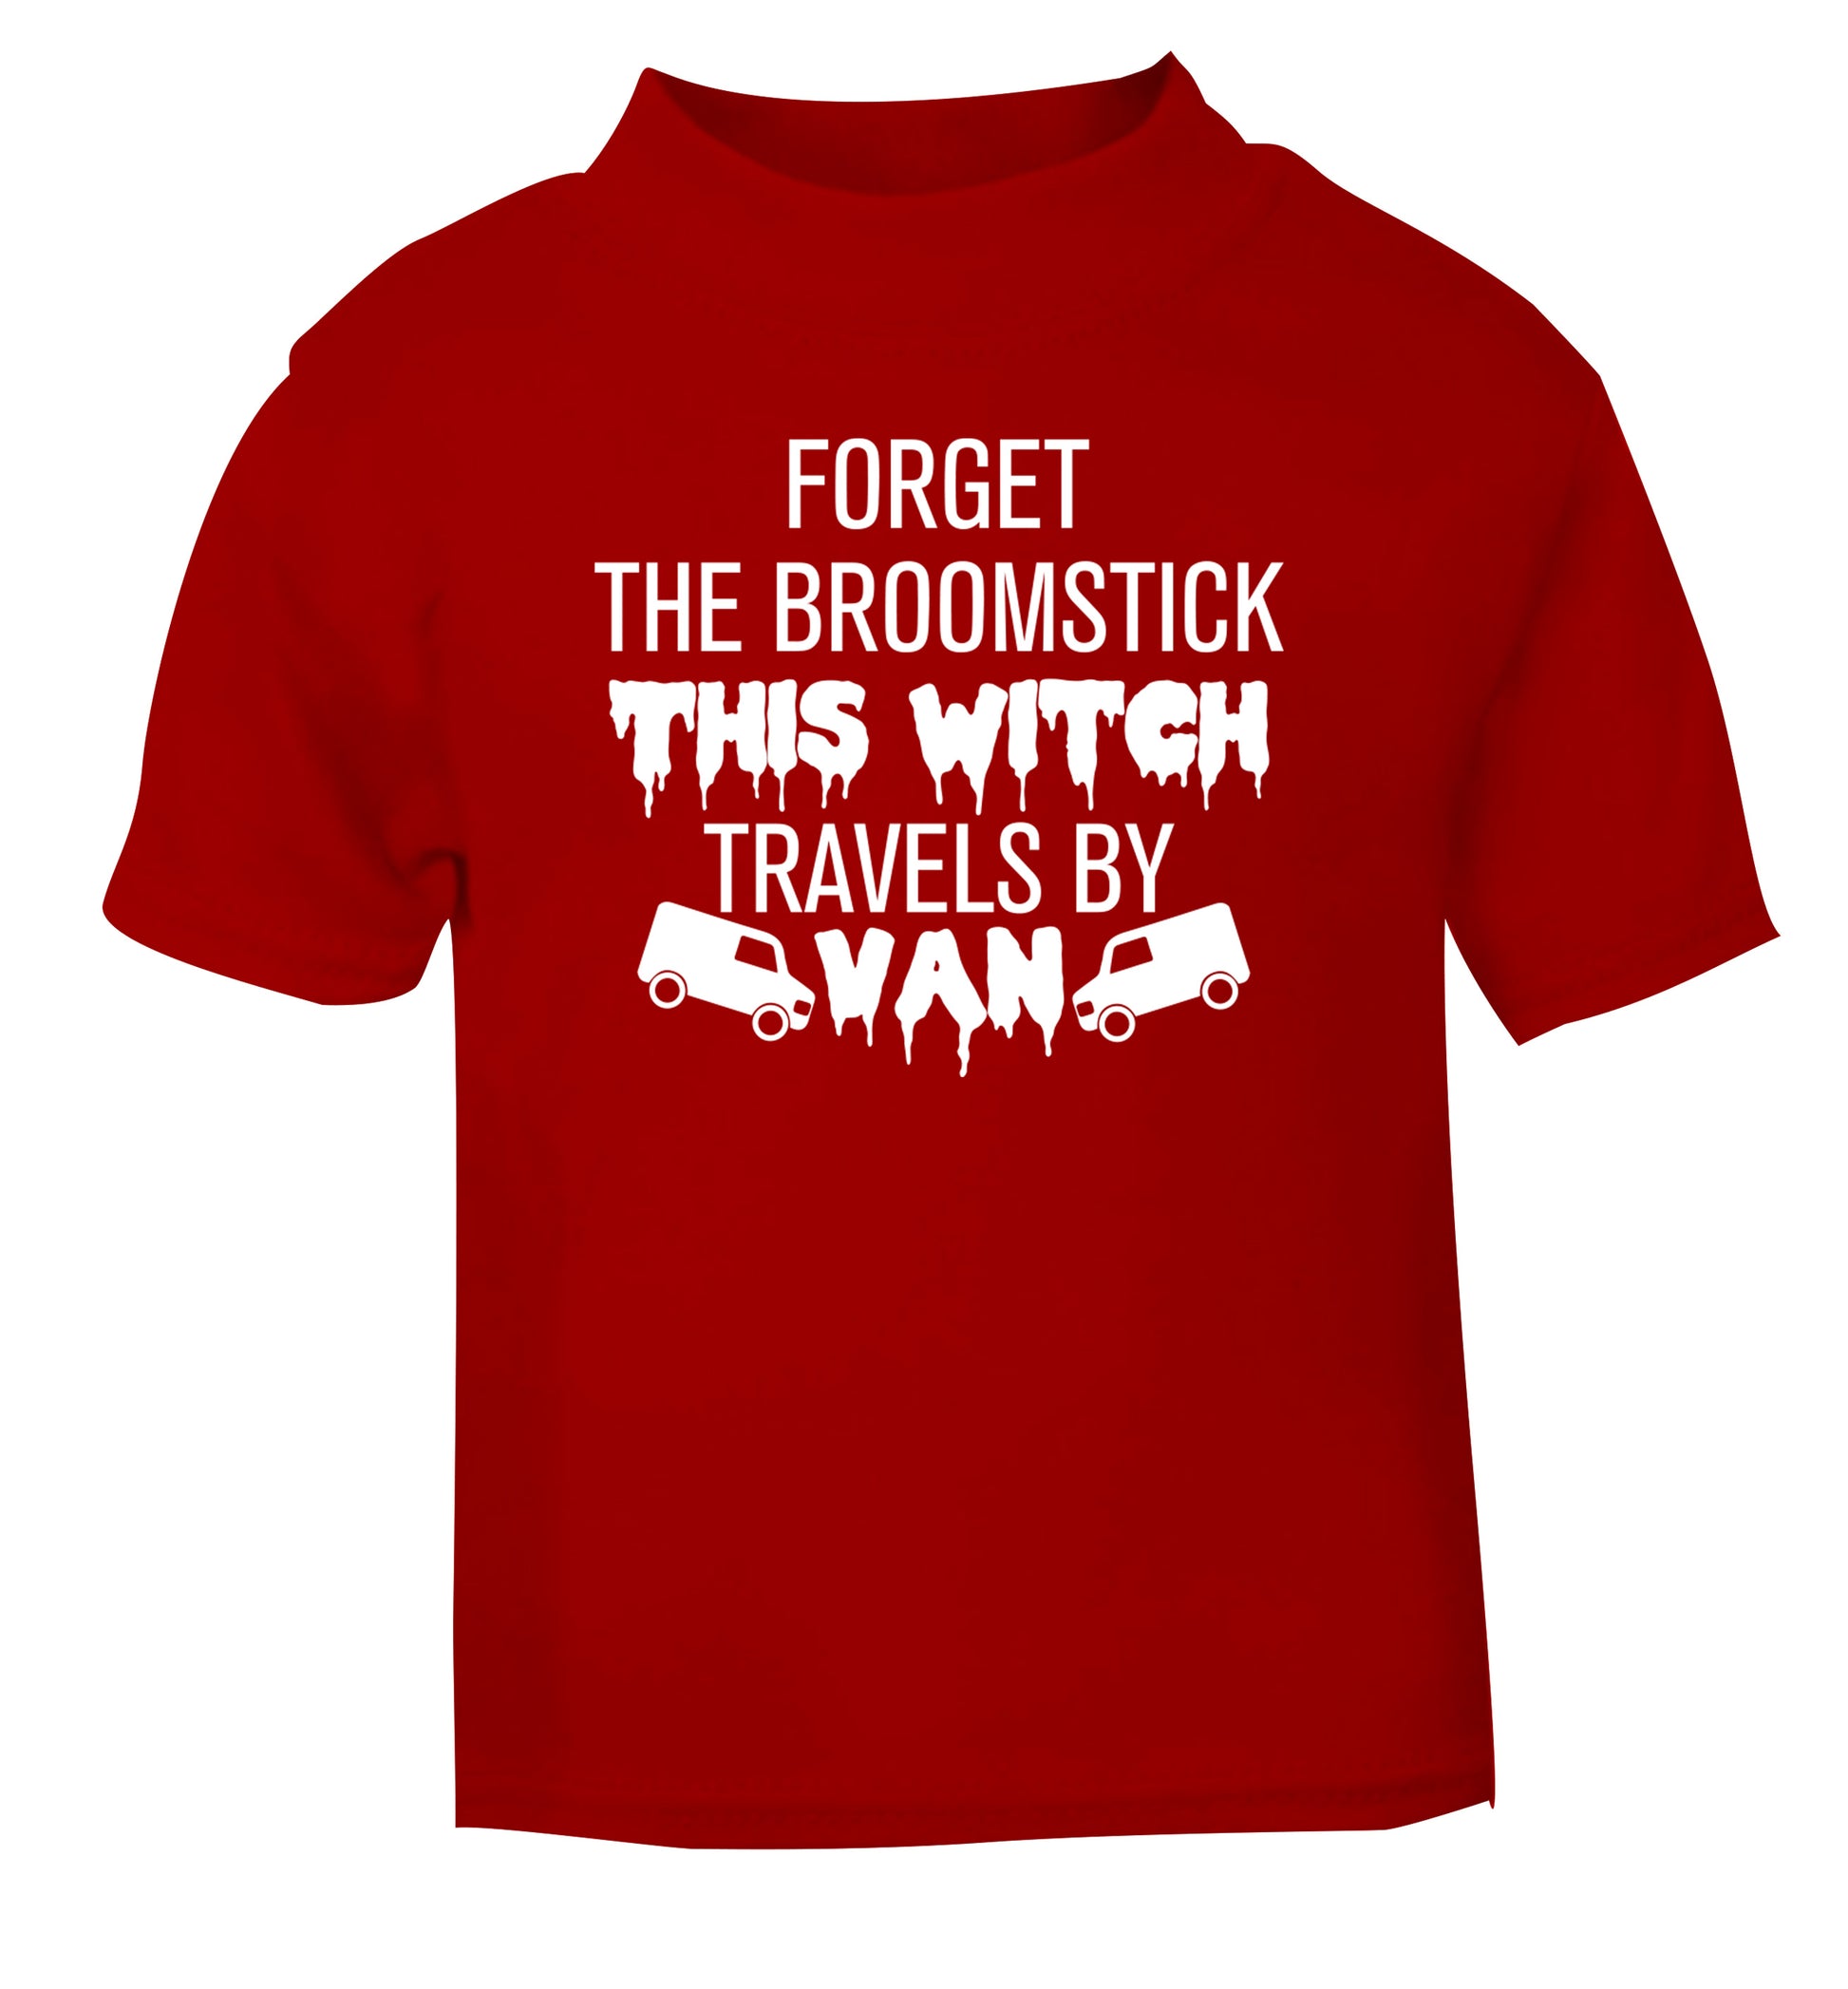 Forget the broomstick this witch travels by van red Baby Toddler Tshirt 2 Years